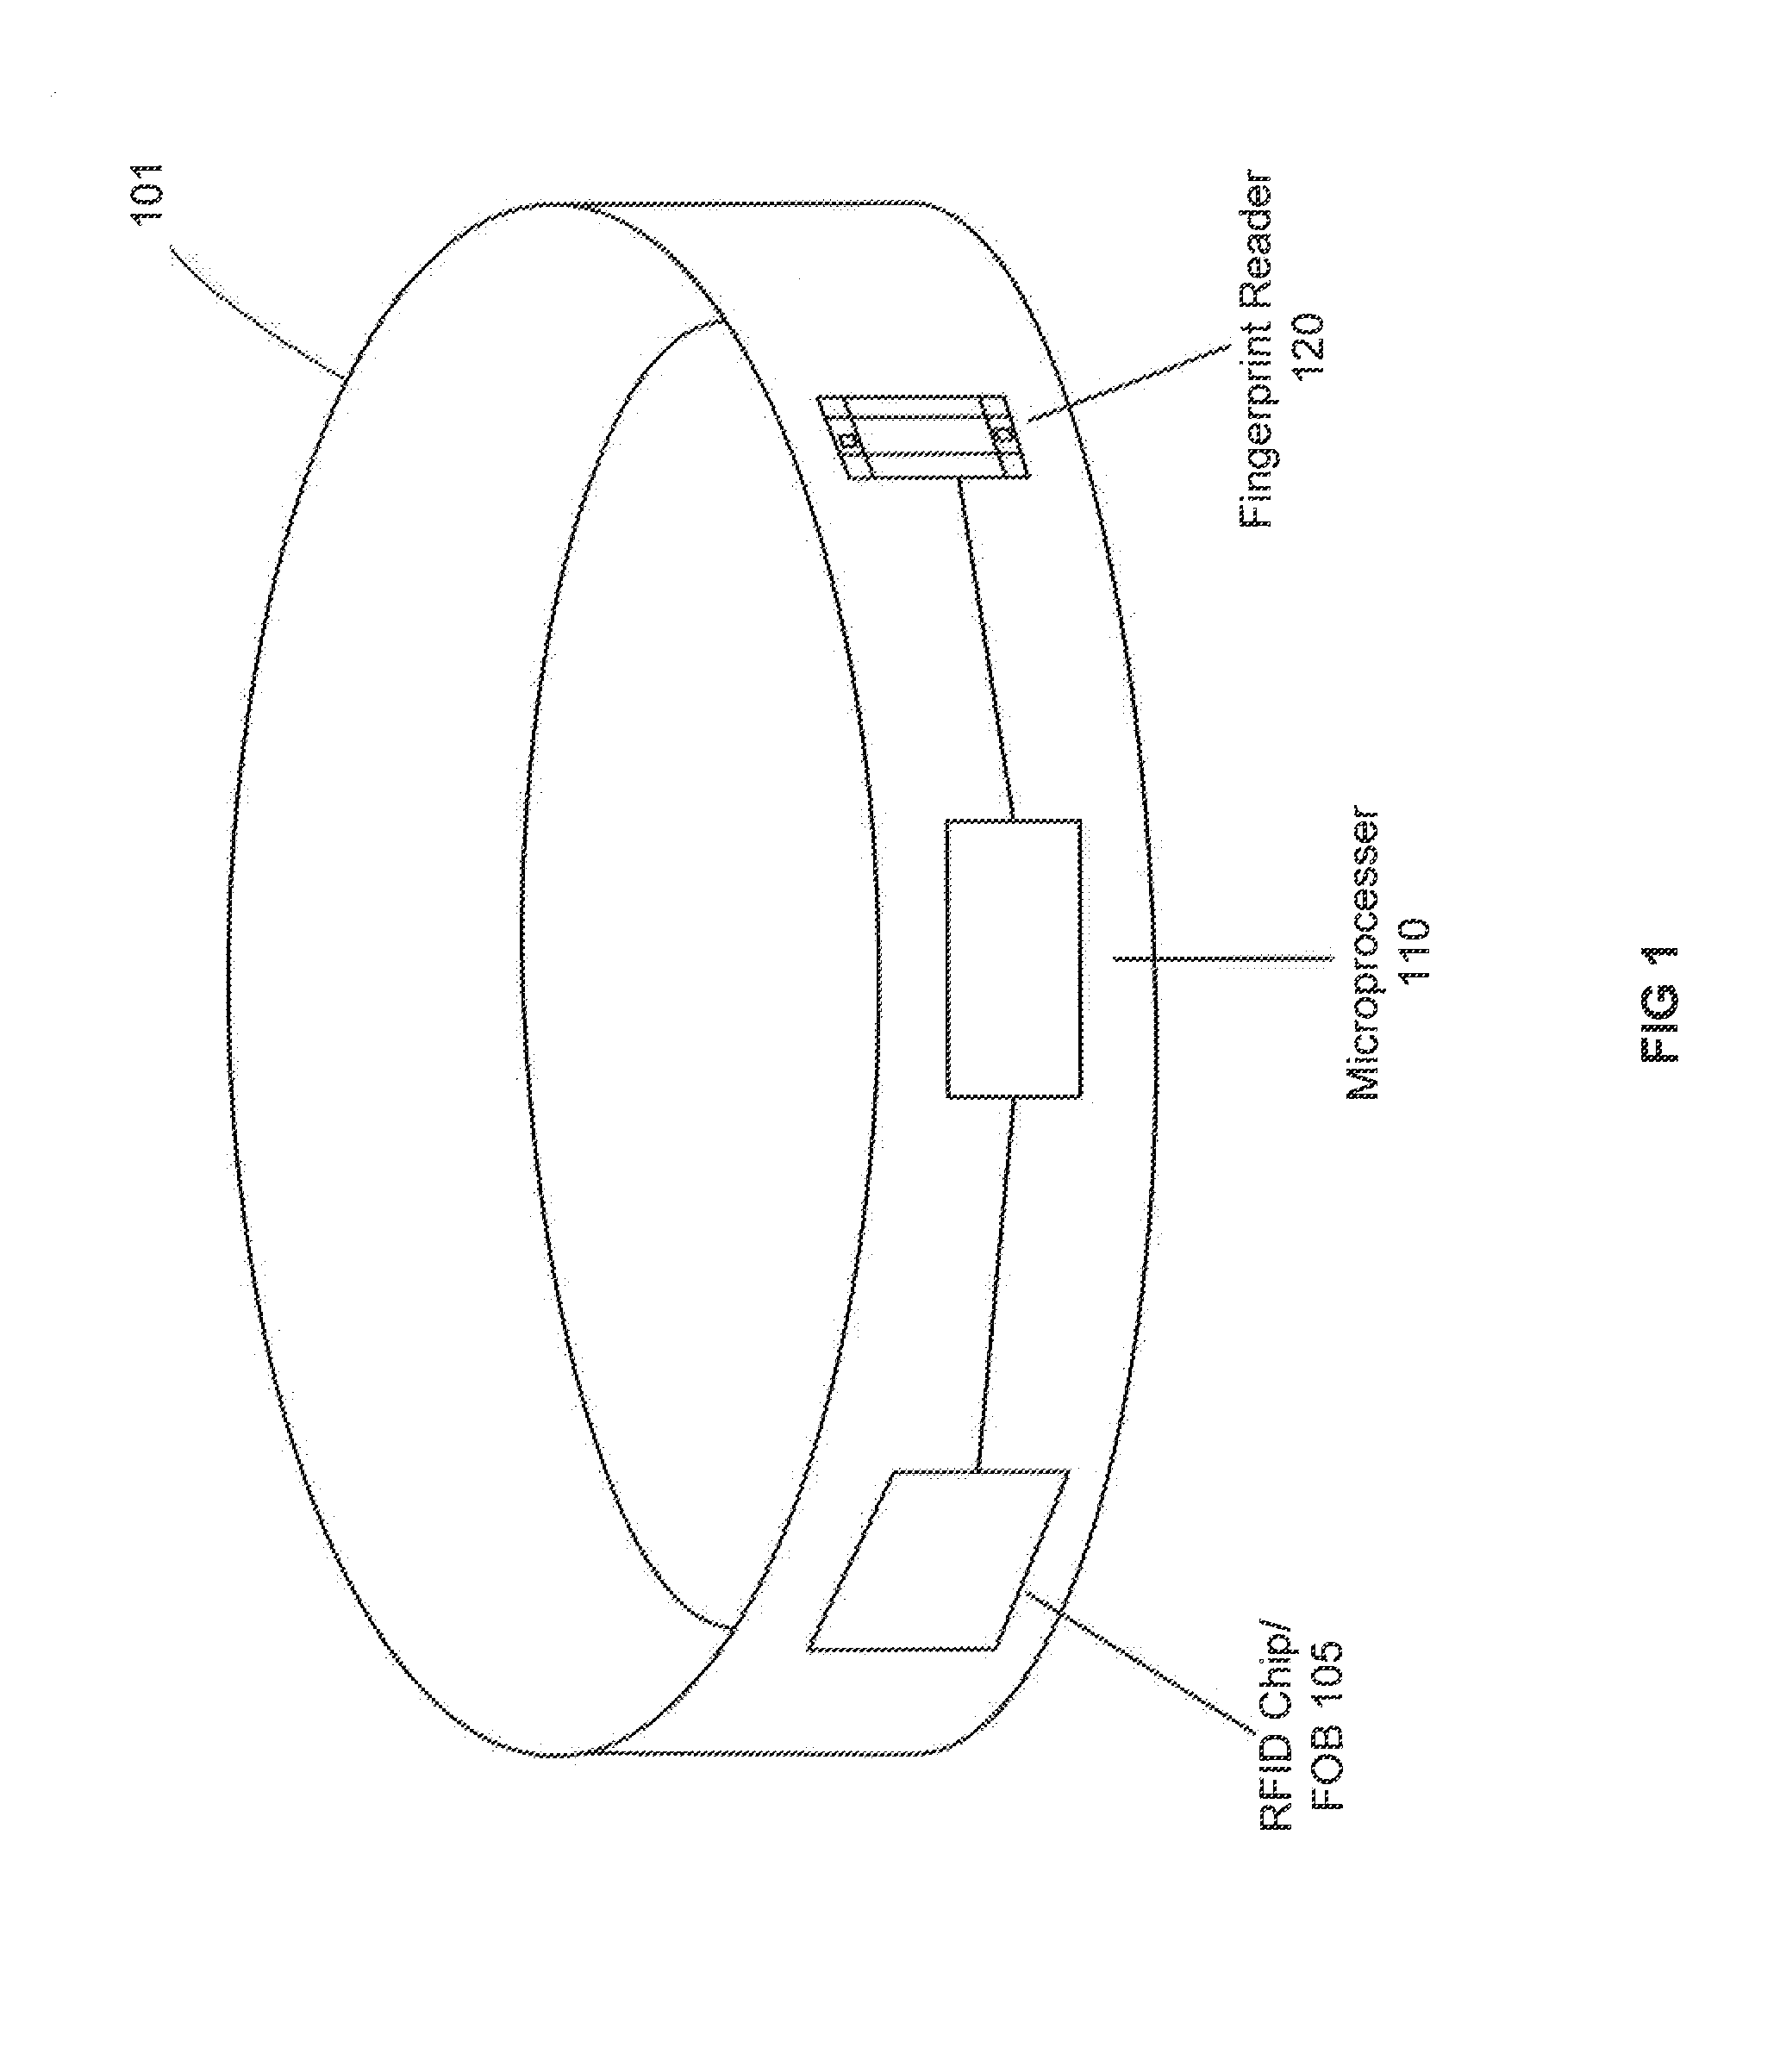 System and method for using flexible circuitry in payment accessories